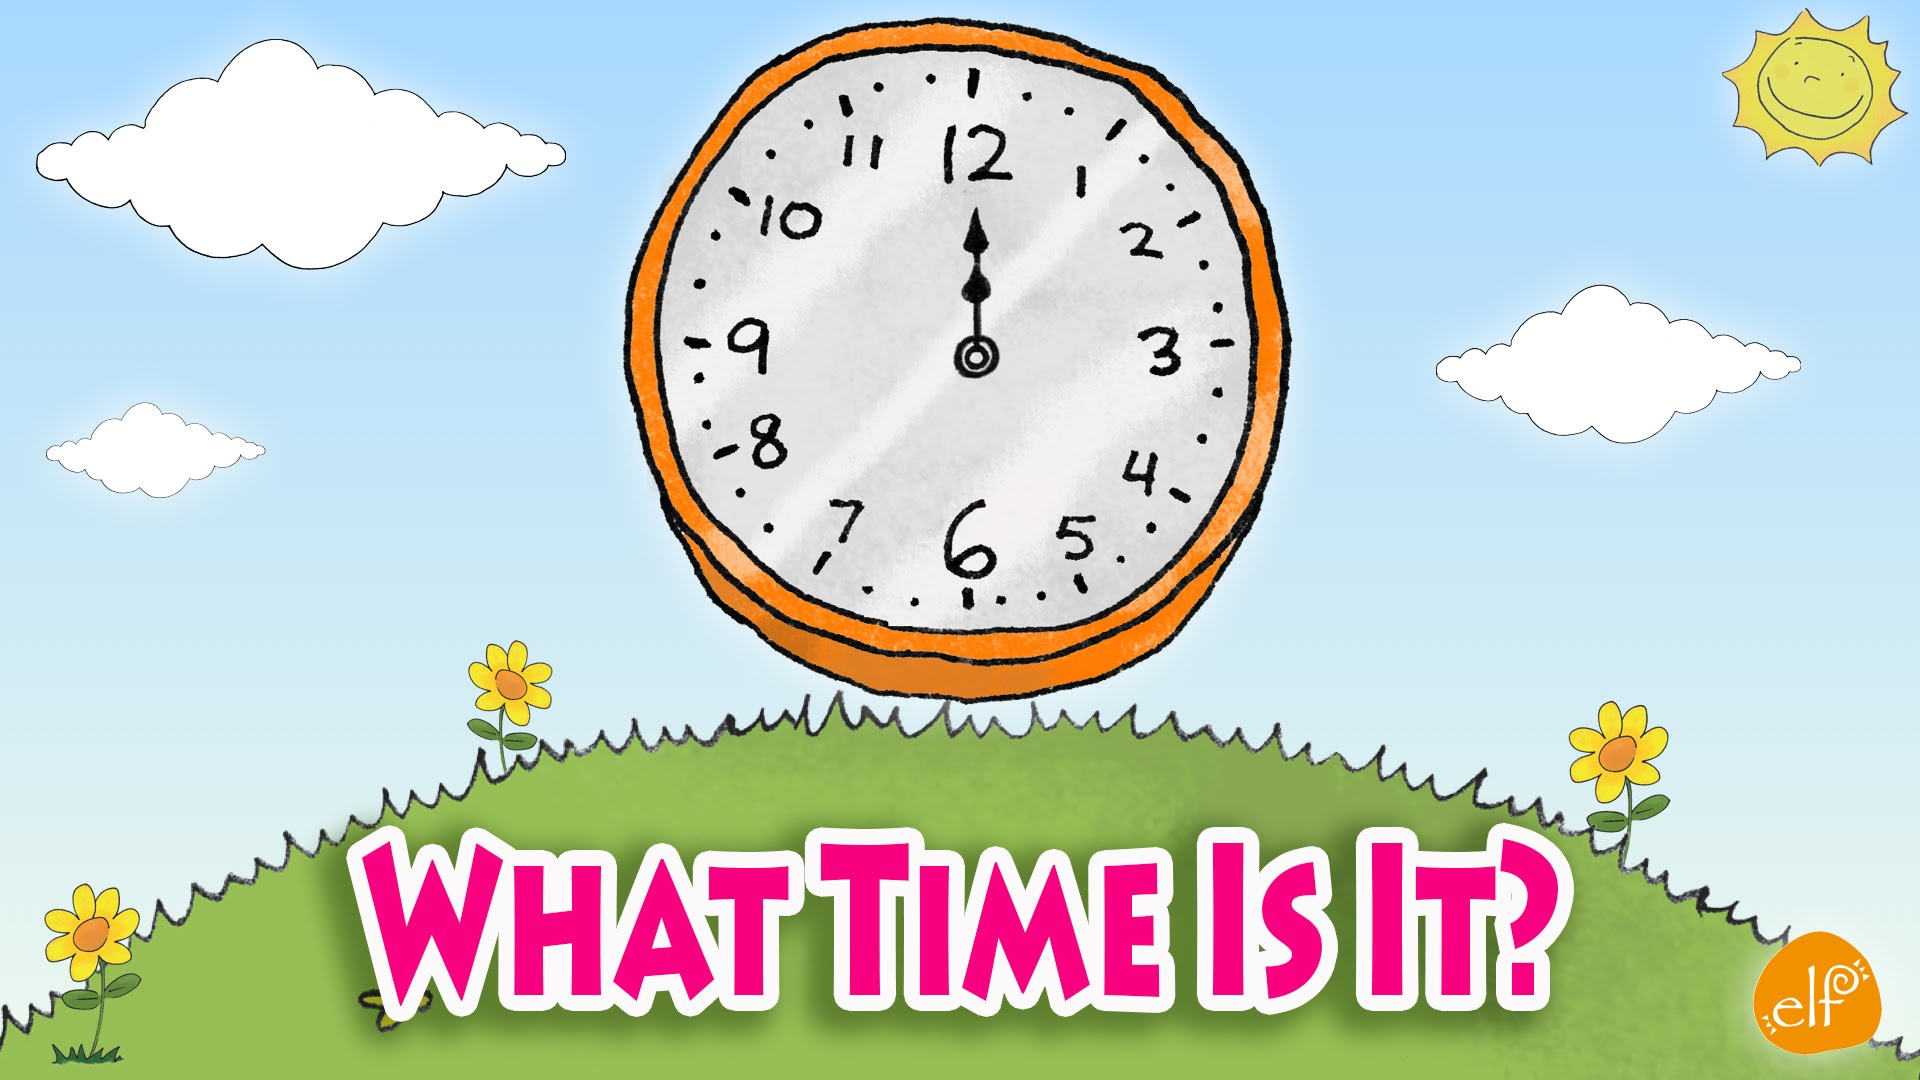 It s time o clock. What the time для детей. What time is it для детей. What time is it картинка. Часы картинка для детей.